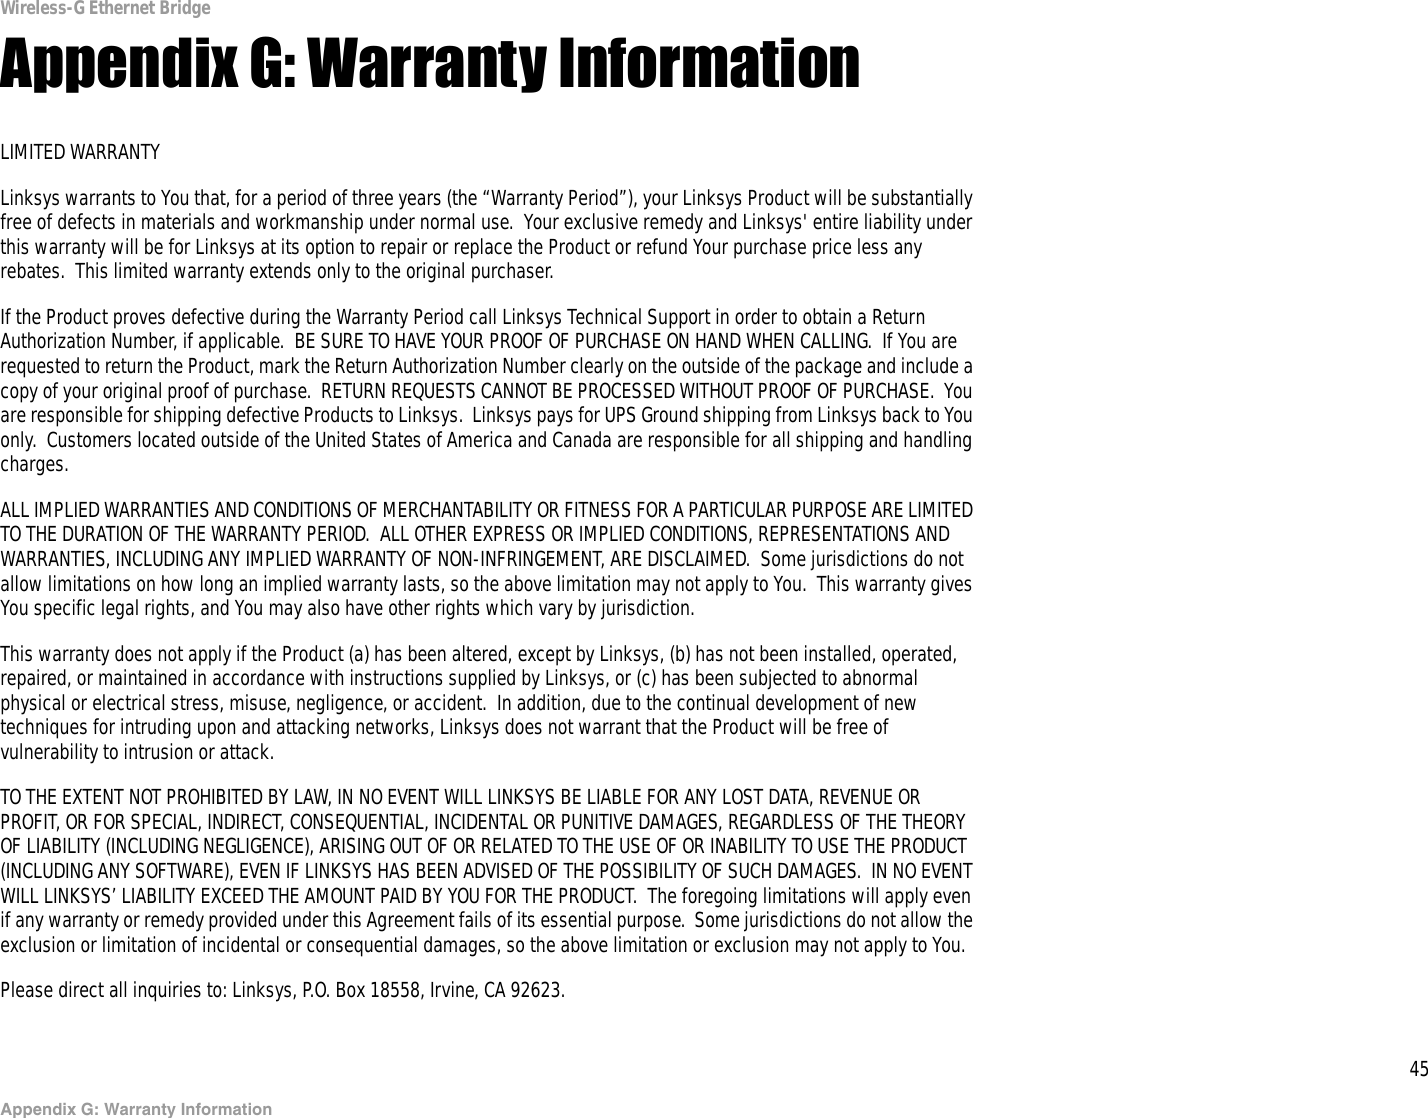 45Appendix G: Warranty InformationWireless-G Ethernet BridgeAppendix G: Warranty InformationLIMITED WARRANTYLinksys warrants to You that, for a period of three years (the “Warranty Period”), your Linksys Product will be substantially free of defects in materials and workmanship under normal use.  Your exclusive remedy and Linksys&apos; entire liability under this warranty will be for Linksys at its option to repair or replace the Product or refund Your purchase price less any rebates.  This limited warranty extends only to the original purchaser.  If the Product proves defective during the Warranty Period call Linksys Technical Support in order to obtain a Return Authorization Number, if applicable.  BE SURE TO HAVE YOUR PROOF OF PURCHASE ON HAND WHEN CALLING.  If You are requested to return the Product, mark the Return Authorization Number clearly on the outside of the package and include a copy of your original proof of purchase.  RETURN REQUESTS CANNOT BE PROCESSED WITHOUT PROOF OF PURCHASE.  You are responsible for shipping defective Products to Linksys.  Linksys pays for UPS Ground shipping from Linksys back to You only.  Customers located outside of the United States of America and Canada are responsible for all shipping and handling charges. ALL IMPLIED WARRANTIES AND CONDITIONS OF MERCHANTABILITY OR FITNESS FOR A PARTICULAR PURPOSE ARE LIMITED TO THE DURATION OF THE WARRANTY PERIOD.  ALL OTHER EXPRESS OR IMPLIED CONDITIONS, REPRESENTATIONS AND WARRANTIES, INCLUDING ANY IMPLIED WARRANTY OF NON-INFRINGEMENT, ARE DISCLAIMED.  Some jurisdictions do not allow limitations on how long an implied warranty lasts, so the above limitation may not apply to You.  This warranty gives You specific legal rights, and You may also have other rights which vary by jurisdiction.This warranty does not apply if the Product (a) has been altered, except by Linksys, (b) has not been installed, operated, repaired, or maintained in accordance with instructions supplied by Linksys, or (c) has been subjected to abnormal physical or electrical stress, misuse, negligence, or accident.  In addition, due to the continual development of new techniques for intruding upon and attacking networks, Linksys does not warrant that the Product will be free of vulnerability to intrusion or attack.TO THE EXTENT NOT PROHIBITED BY LAW, IN NO EVENT WILL LINKSYS BE LIABLE FOR ANY LOST DATA, REVENUE OR PROFIT, OR FOR SPECIAL, INDIRECT, CONSEQUENTIAL, INCIDENTAL OR PUNITIVE DAMAGES, REGARDLESS OF THE THEORY OF LIABILITY (INCLUDING NEGLIGENCE), ARISING OUT OF OR RELATED TO THE USE OF OR INABILITY TO USE THE PRODUCT (INCLUDING ANY SOFTWARE), EVEN IF LINKSYS HAS BEEN ADVISED OF THE POSSIBILITY OF SUCH DAMAGES.  IN NO EVENT WILL LINKSYS’ LIABILITY EXCEED THE AMOUNT PAID BY YOU FOR THE PRODUCT.  The foregoing limitations will apply even if any warranty or remedy provided under this Agreement fails of its essential purpose.  Some jurisdictions do not allow the exclusion or limitation of incidental or consequential damages, so the above limitation or exclusion may not apply to You.Please direct all inquiries to: Linksys, P.O. Box 18558, Irvine, CA 92623.